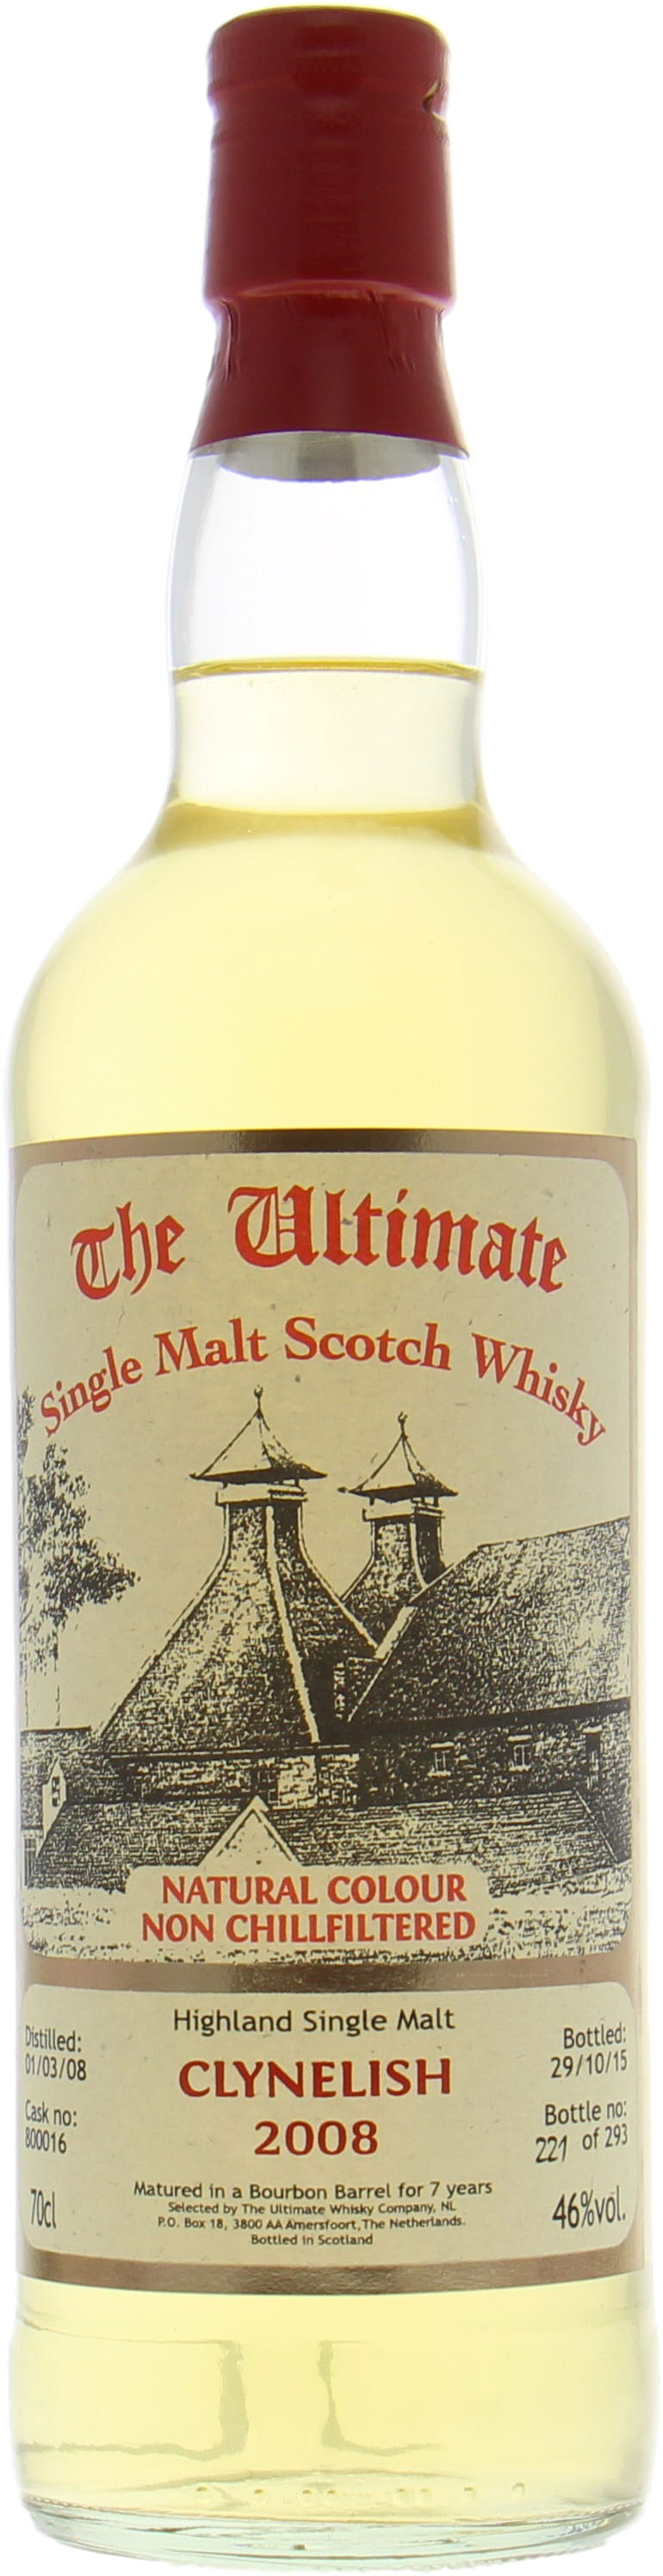 Clynelish - 7 Years Old van Wees The Ultimate Cask 800016 46% 2008 Perfect